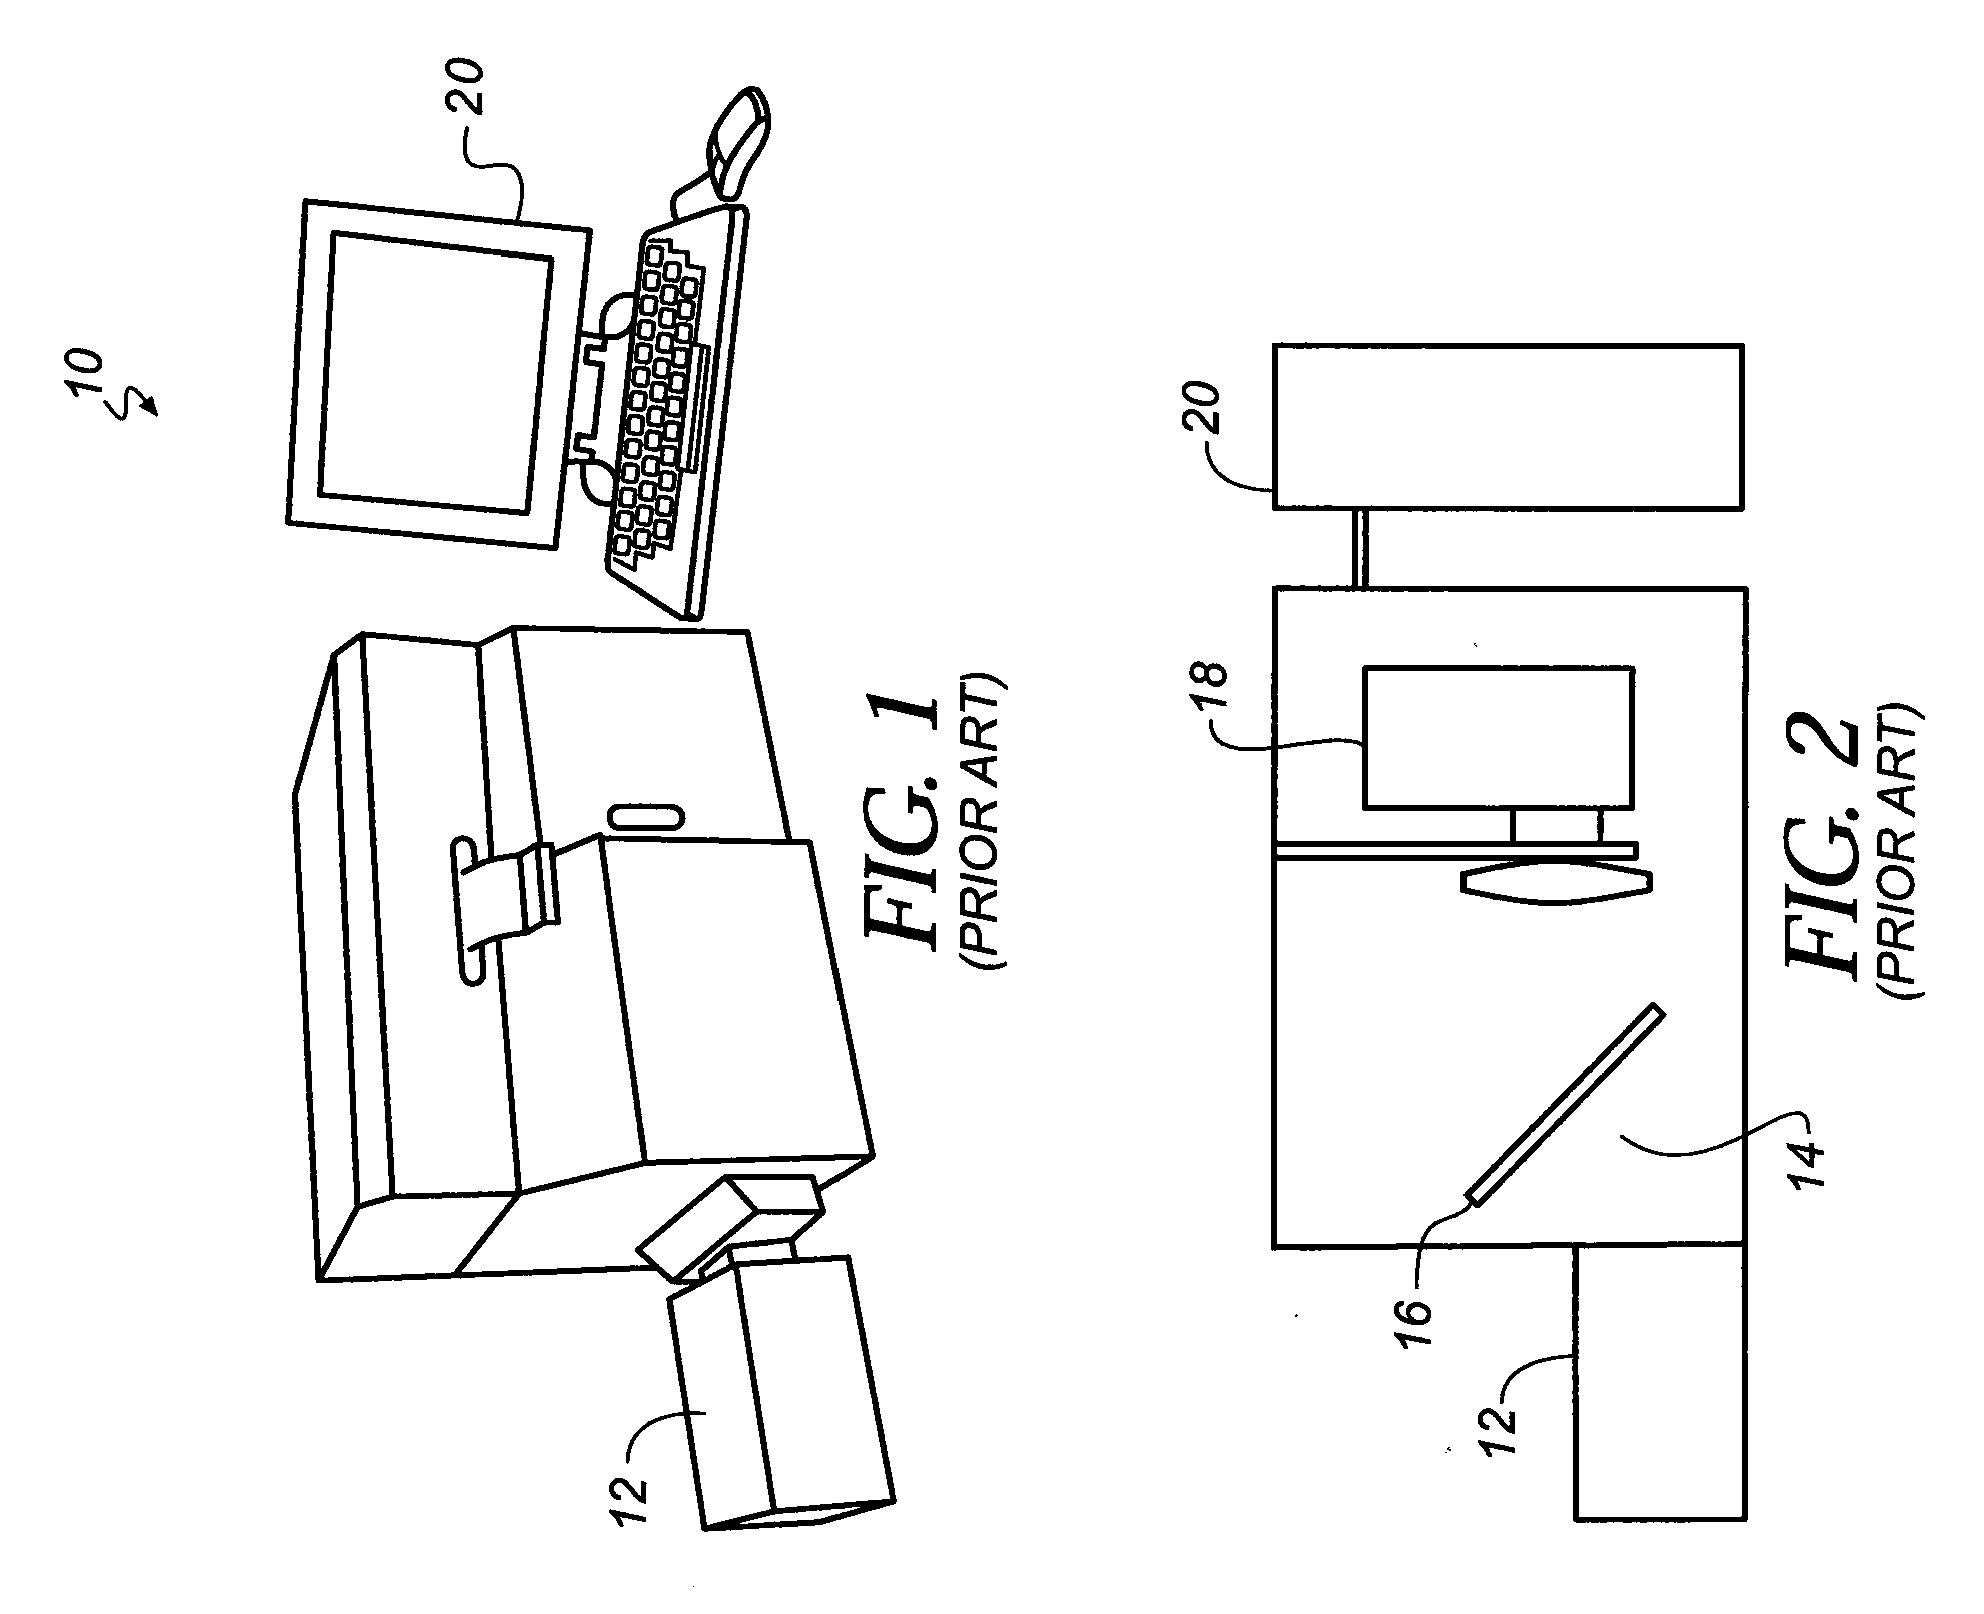 Apparatus and method for multi-modal imaging using nanoparticle multi-modal imaging probes